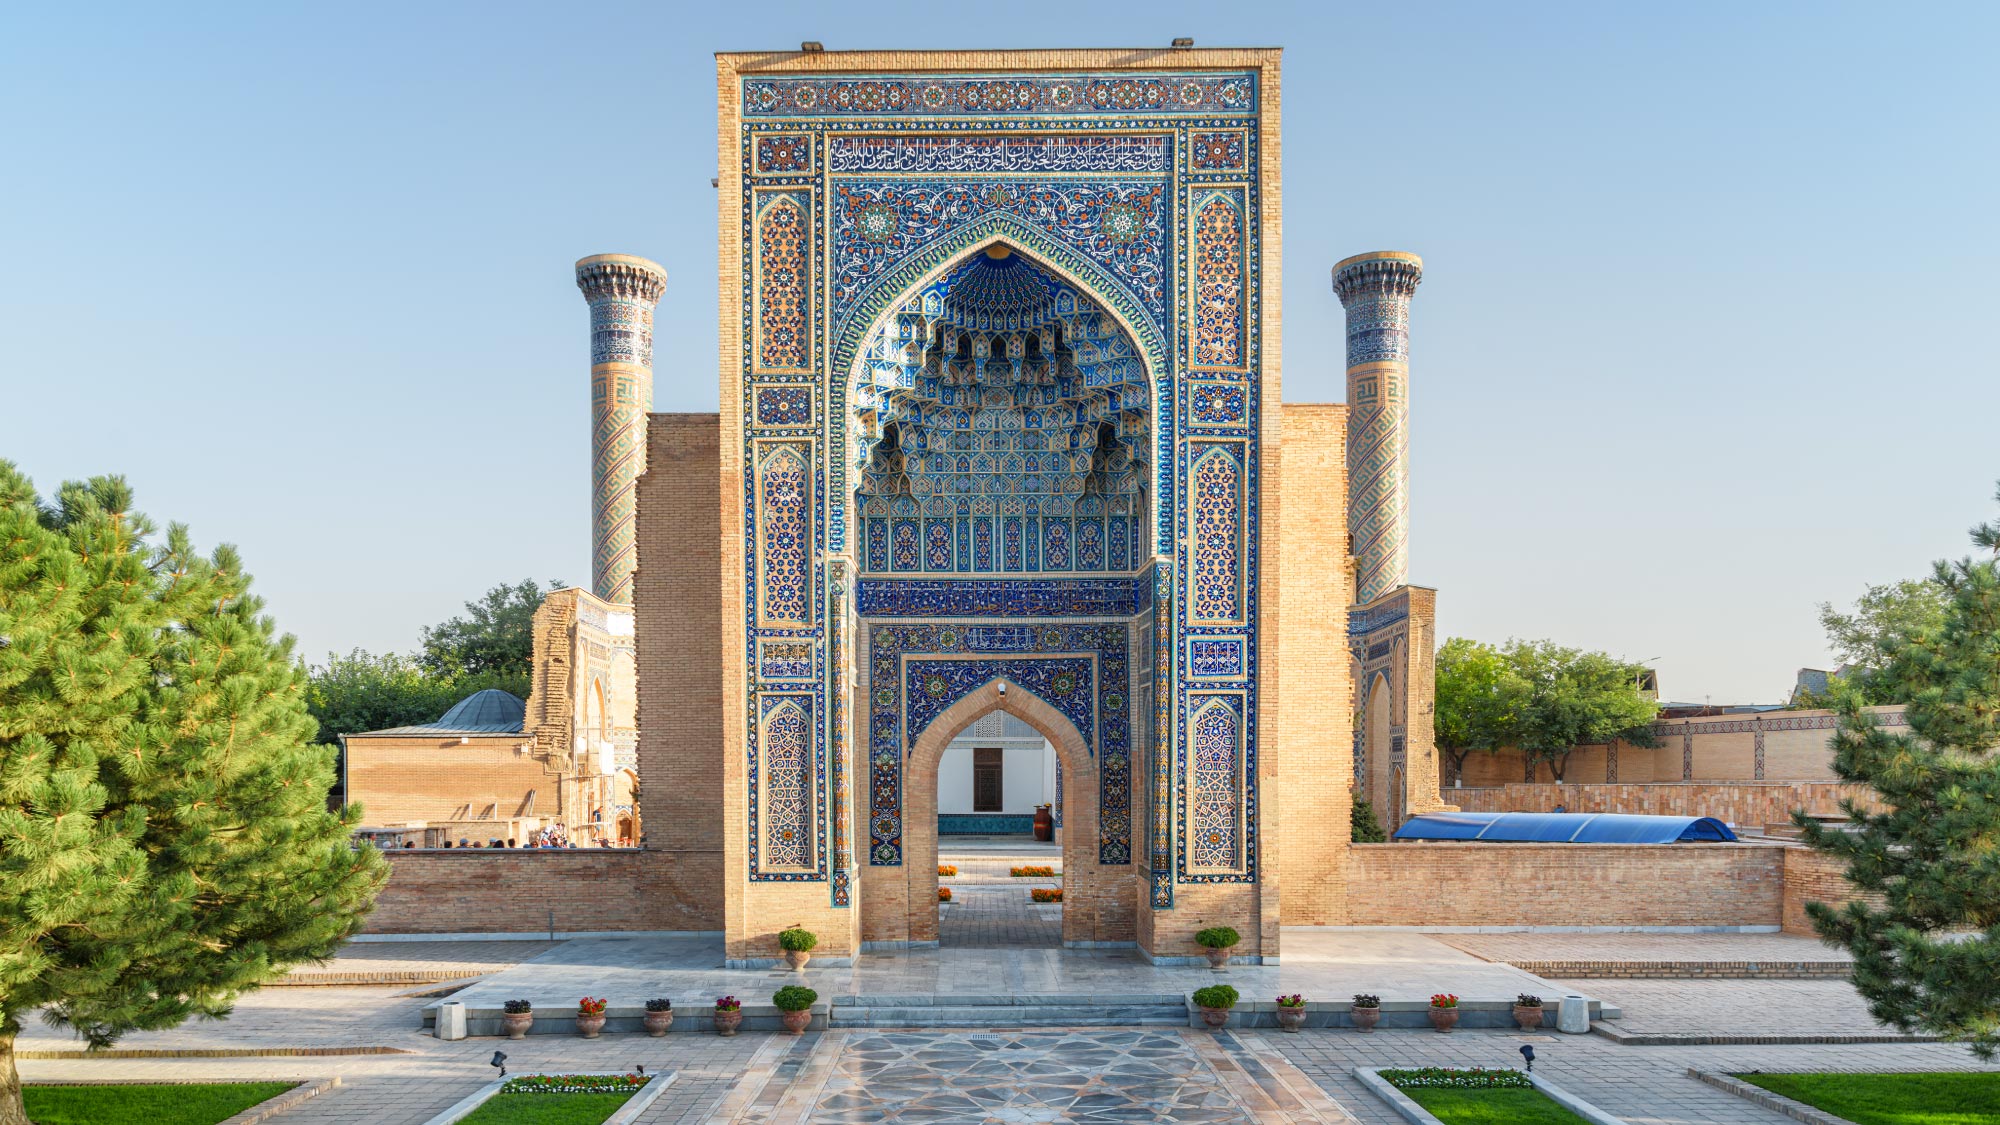 A stunning view of the historic city of Samarkand, Uzbekistan, showcasing its majestic architecture and intricate tilework. Samarkand is a highlight of a journey to Australia, visiting 21 countries, perfect for travelers who fly and own their own airplanes.